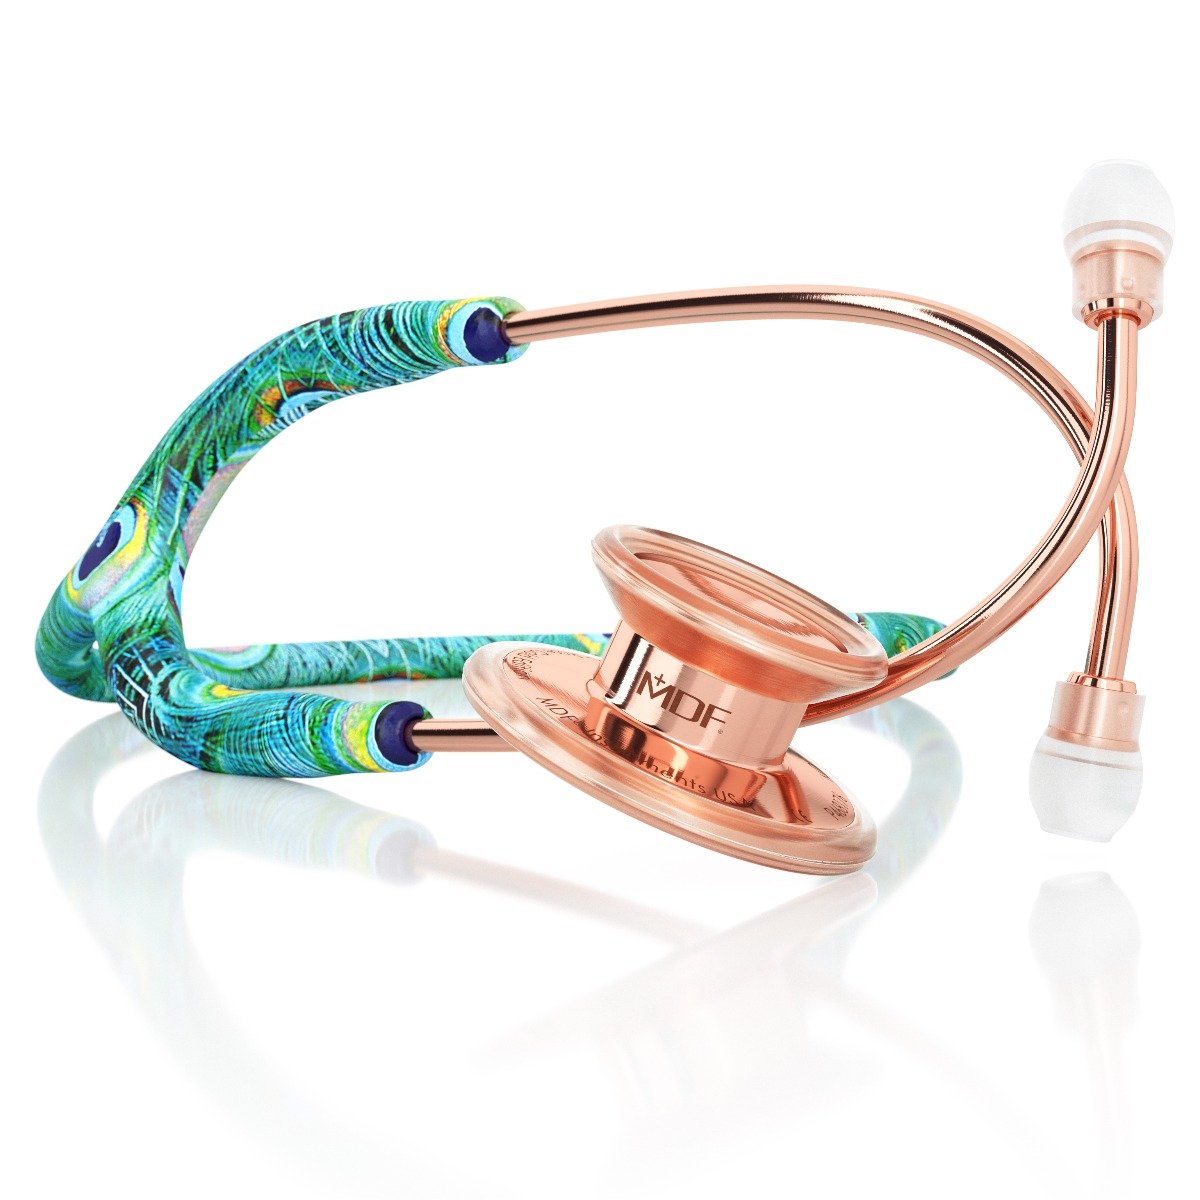 MDF® MD One® Stainless Steel Dual Head Stethoscope (MDF777) - Rose Gold and Peacock